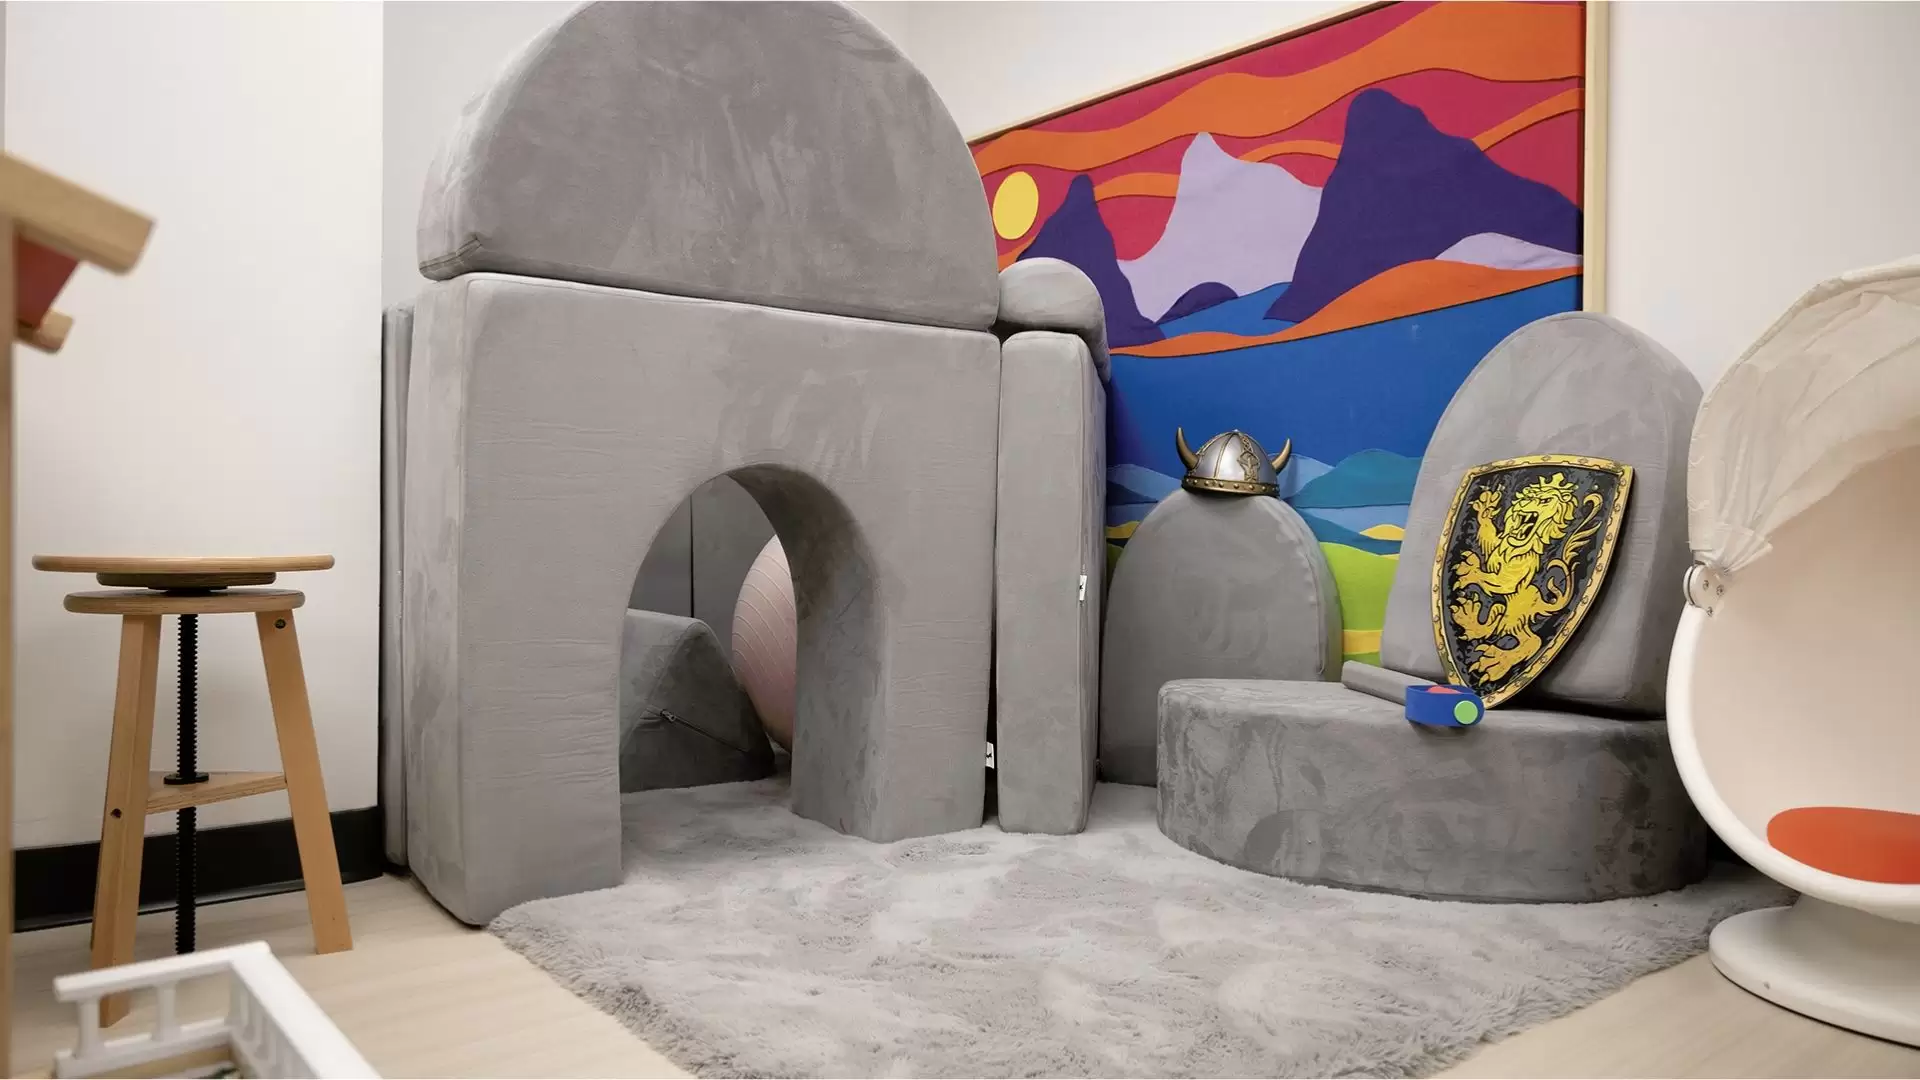 Playroom with large grey pillows in a castle play area with toy shield, sword, and hat on a grey carpet. A colourful felt art board is against the white wall and stools and chairs off to the side.